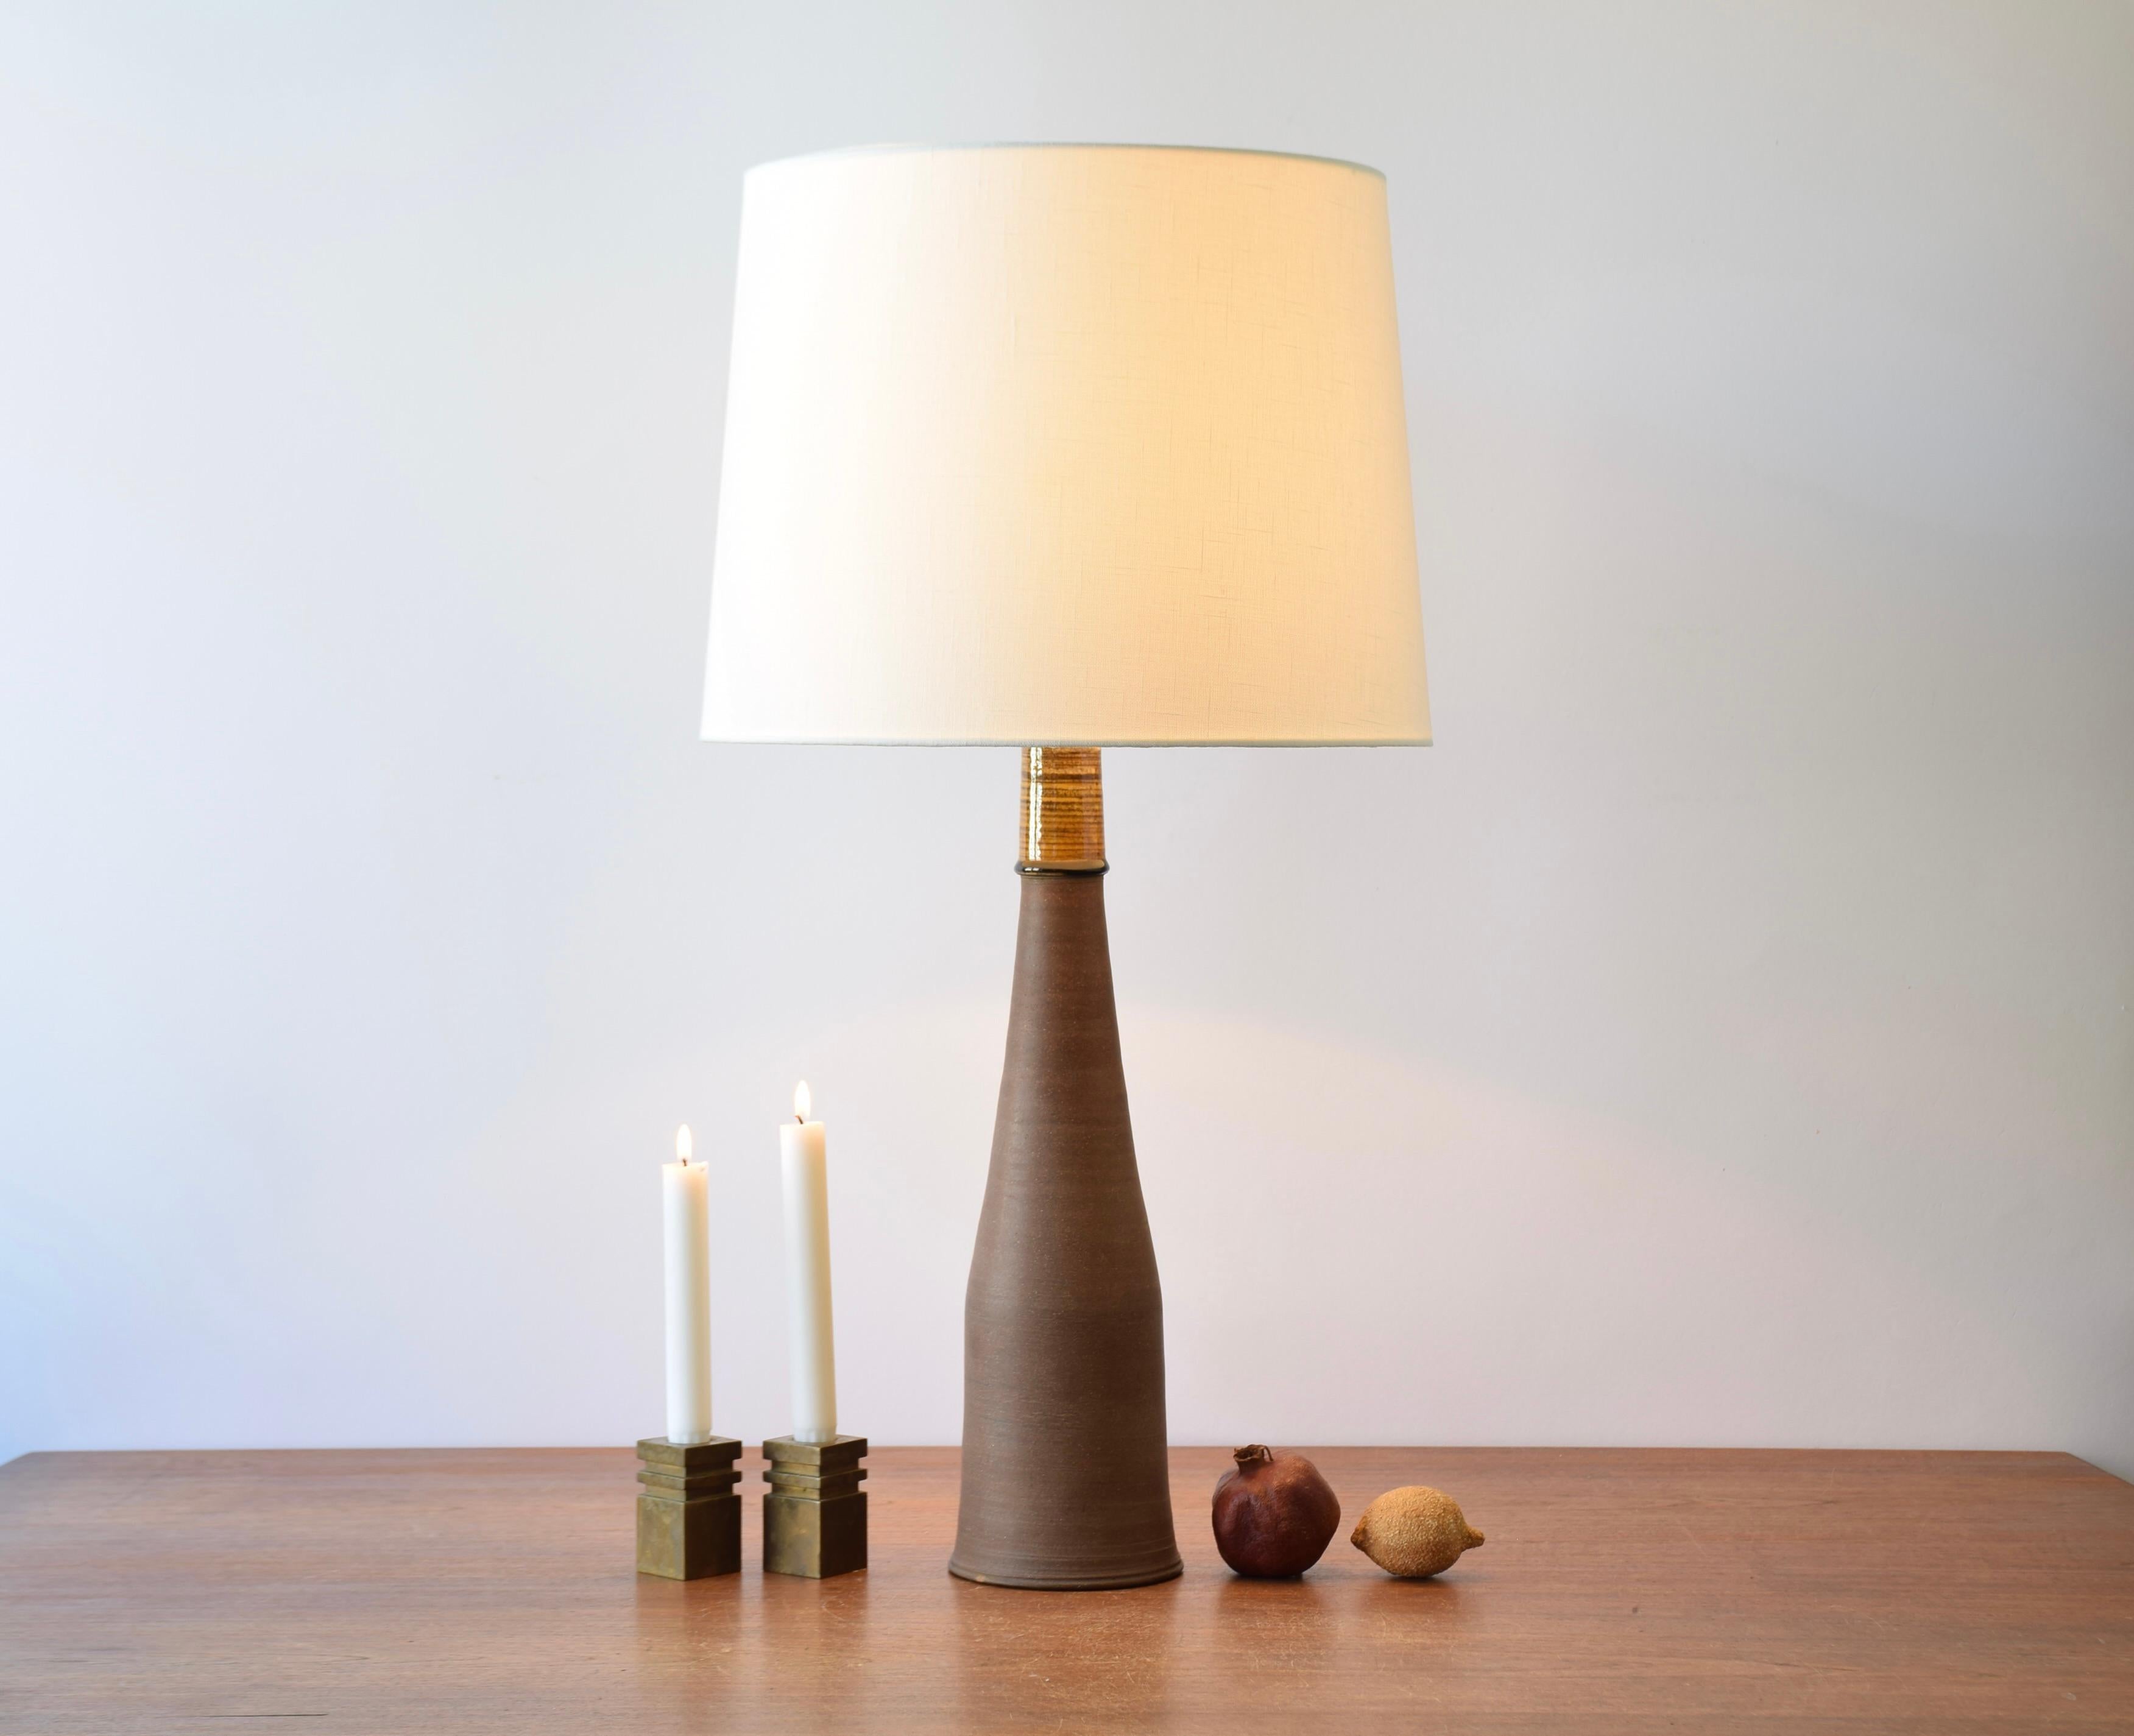 Tall and elegant table lamp by Nils Kähler and made for Herman August Kähler's ceramic workshop (HAK) in Denmark in the 1960s.

The lampbase is made from brown clay and has a smooth and soft surface. It's contrasted by the top which is decorated